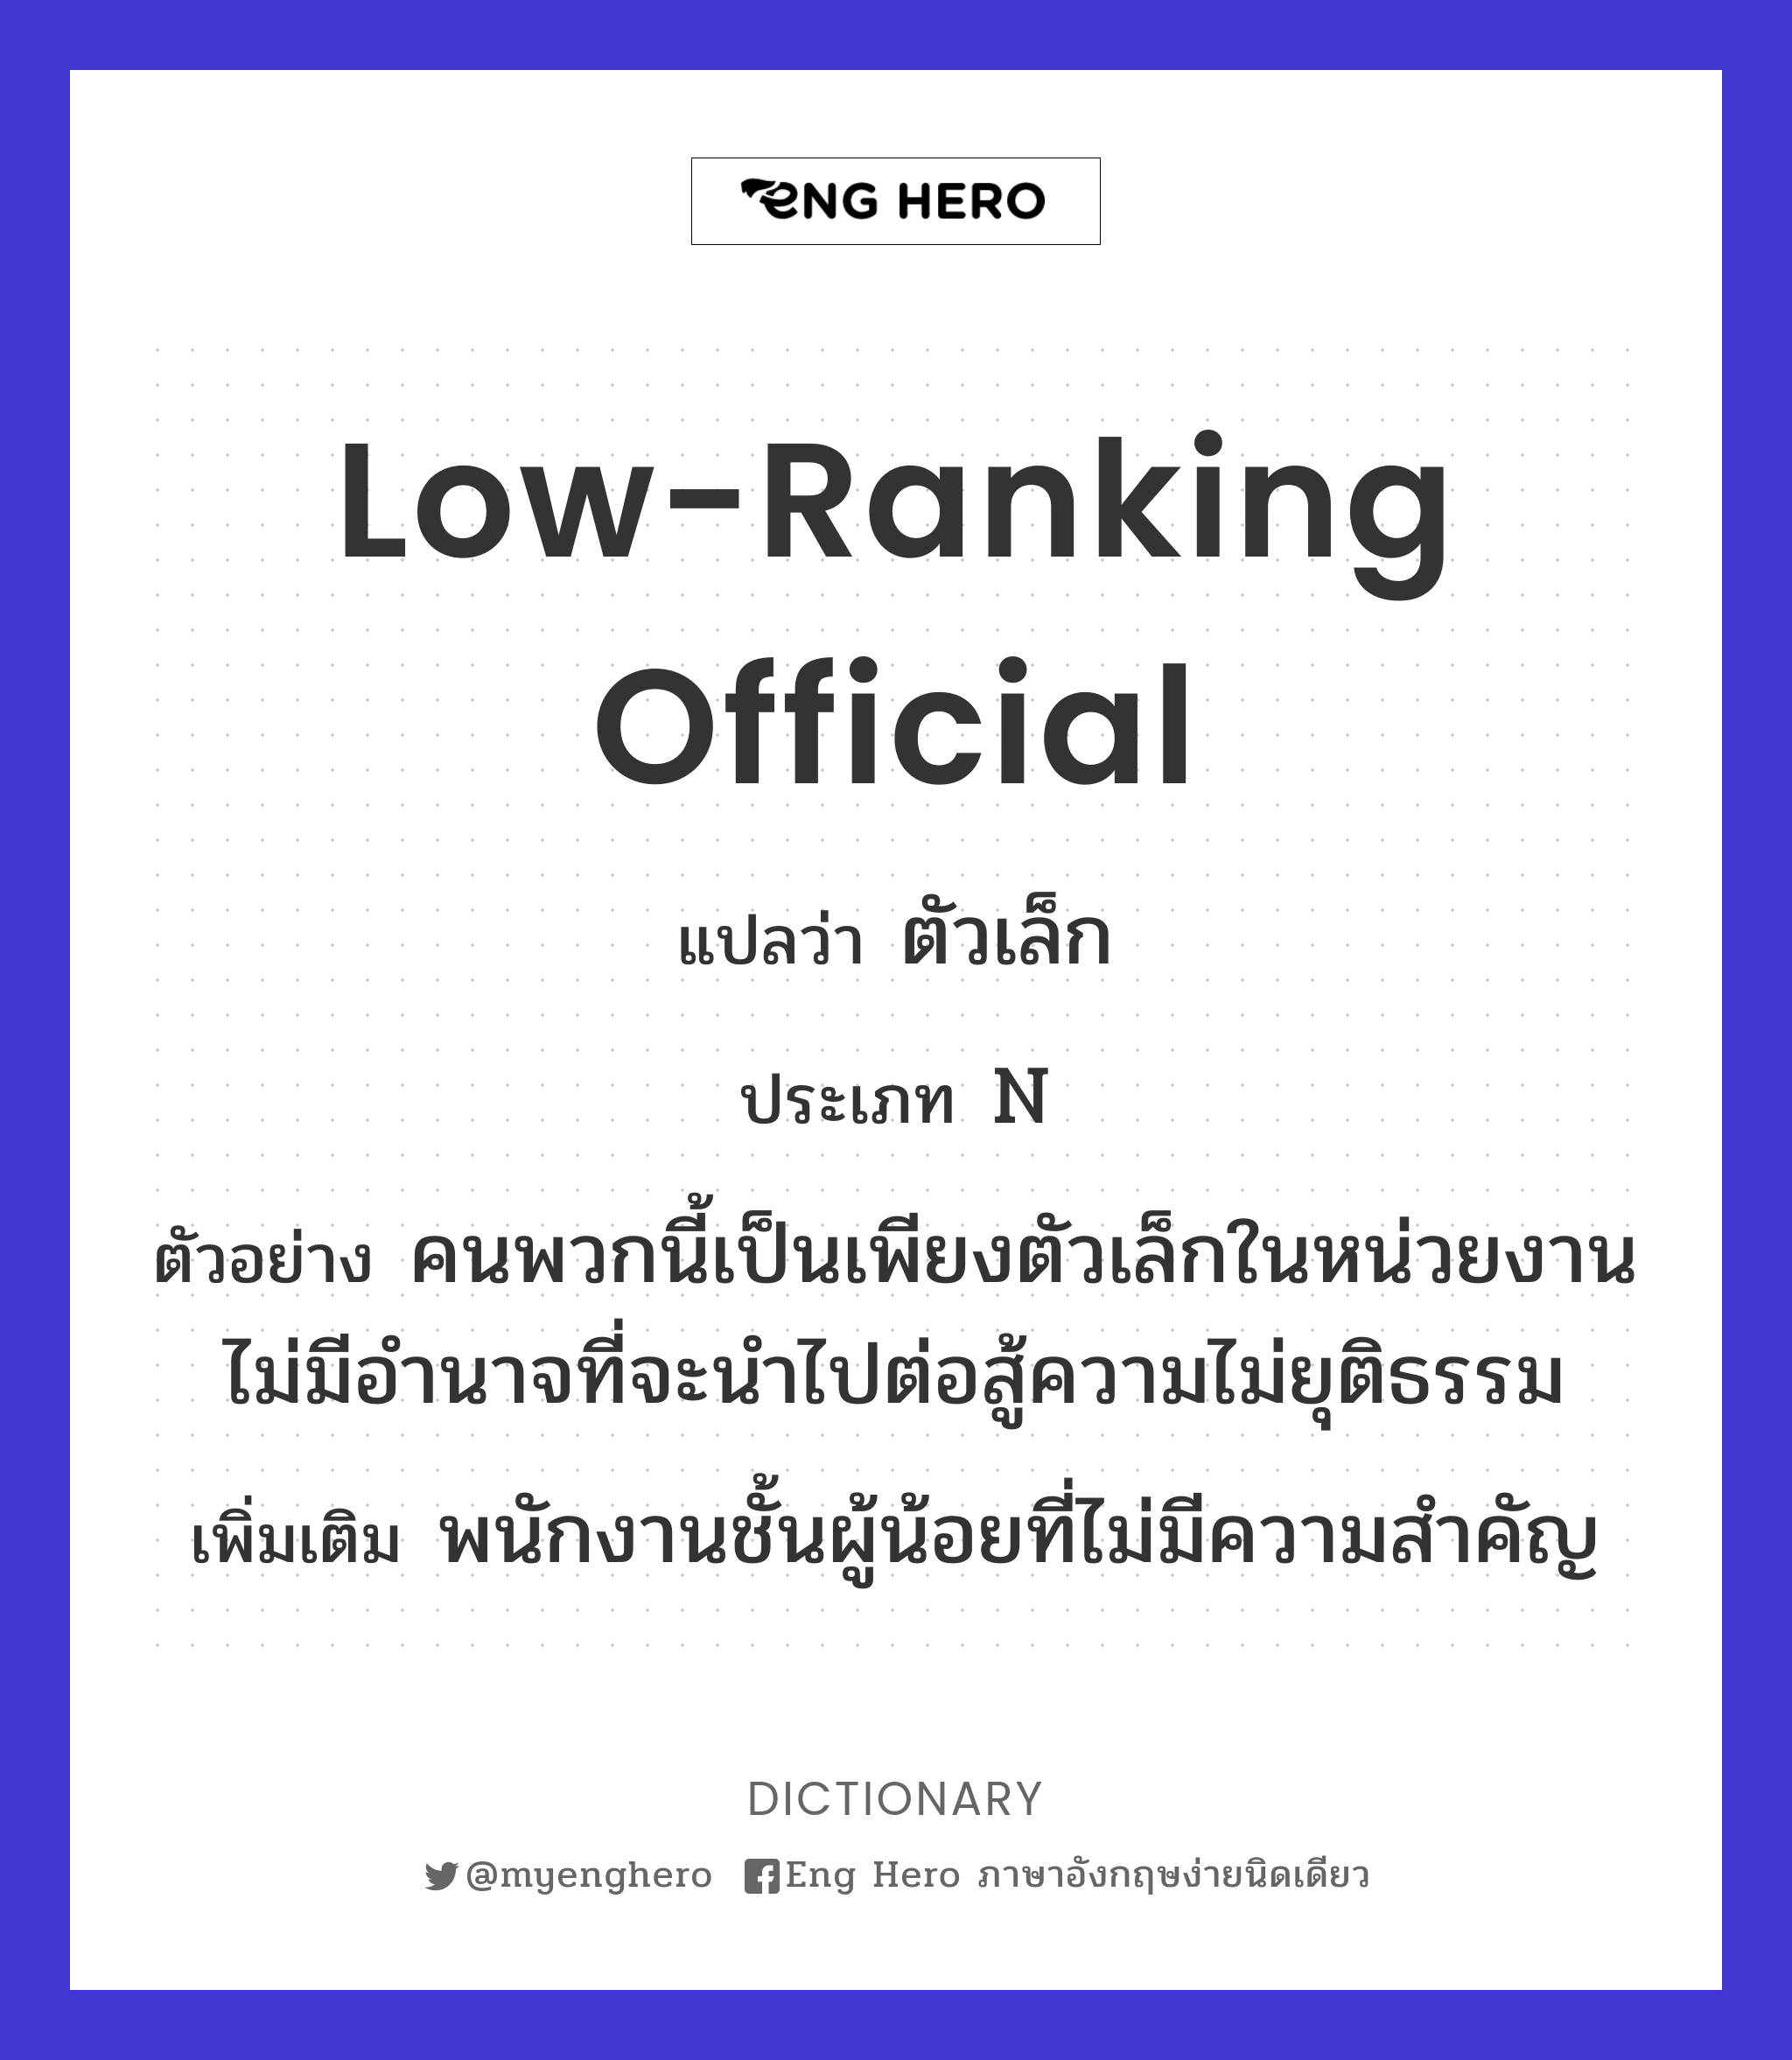 low-ranking official